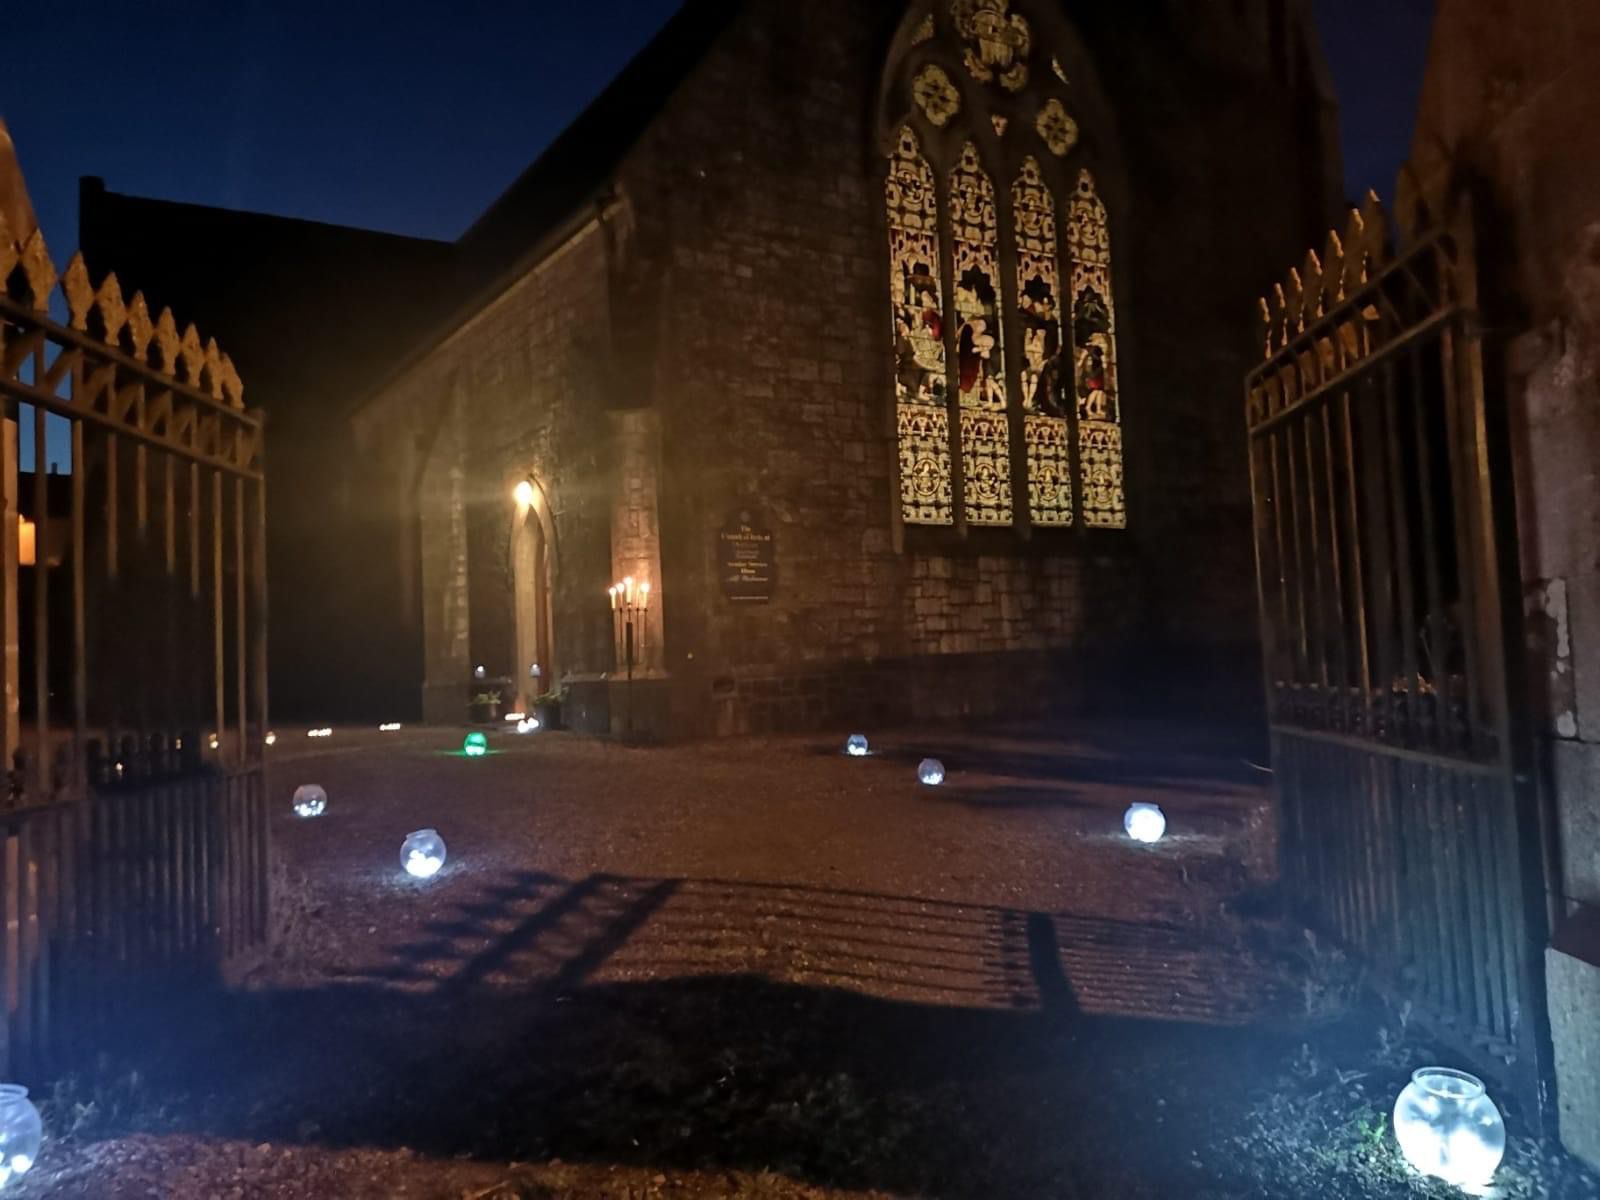 Christ Church, Rushbrooke, was recently lit during the night as a reminder that those who suffer from mental health problems and bereavement from suicide are not alone.